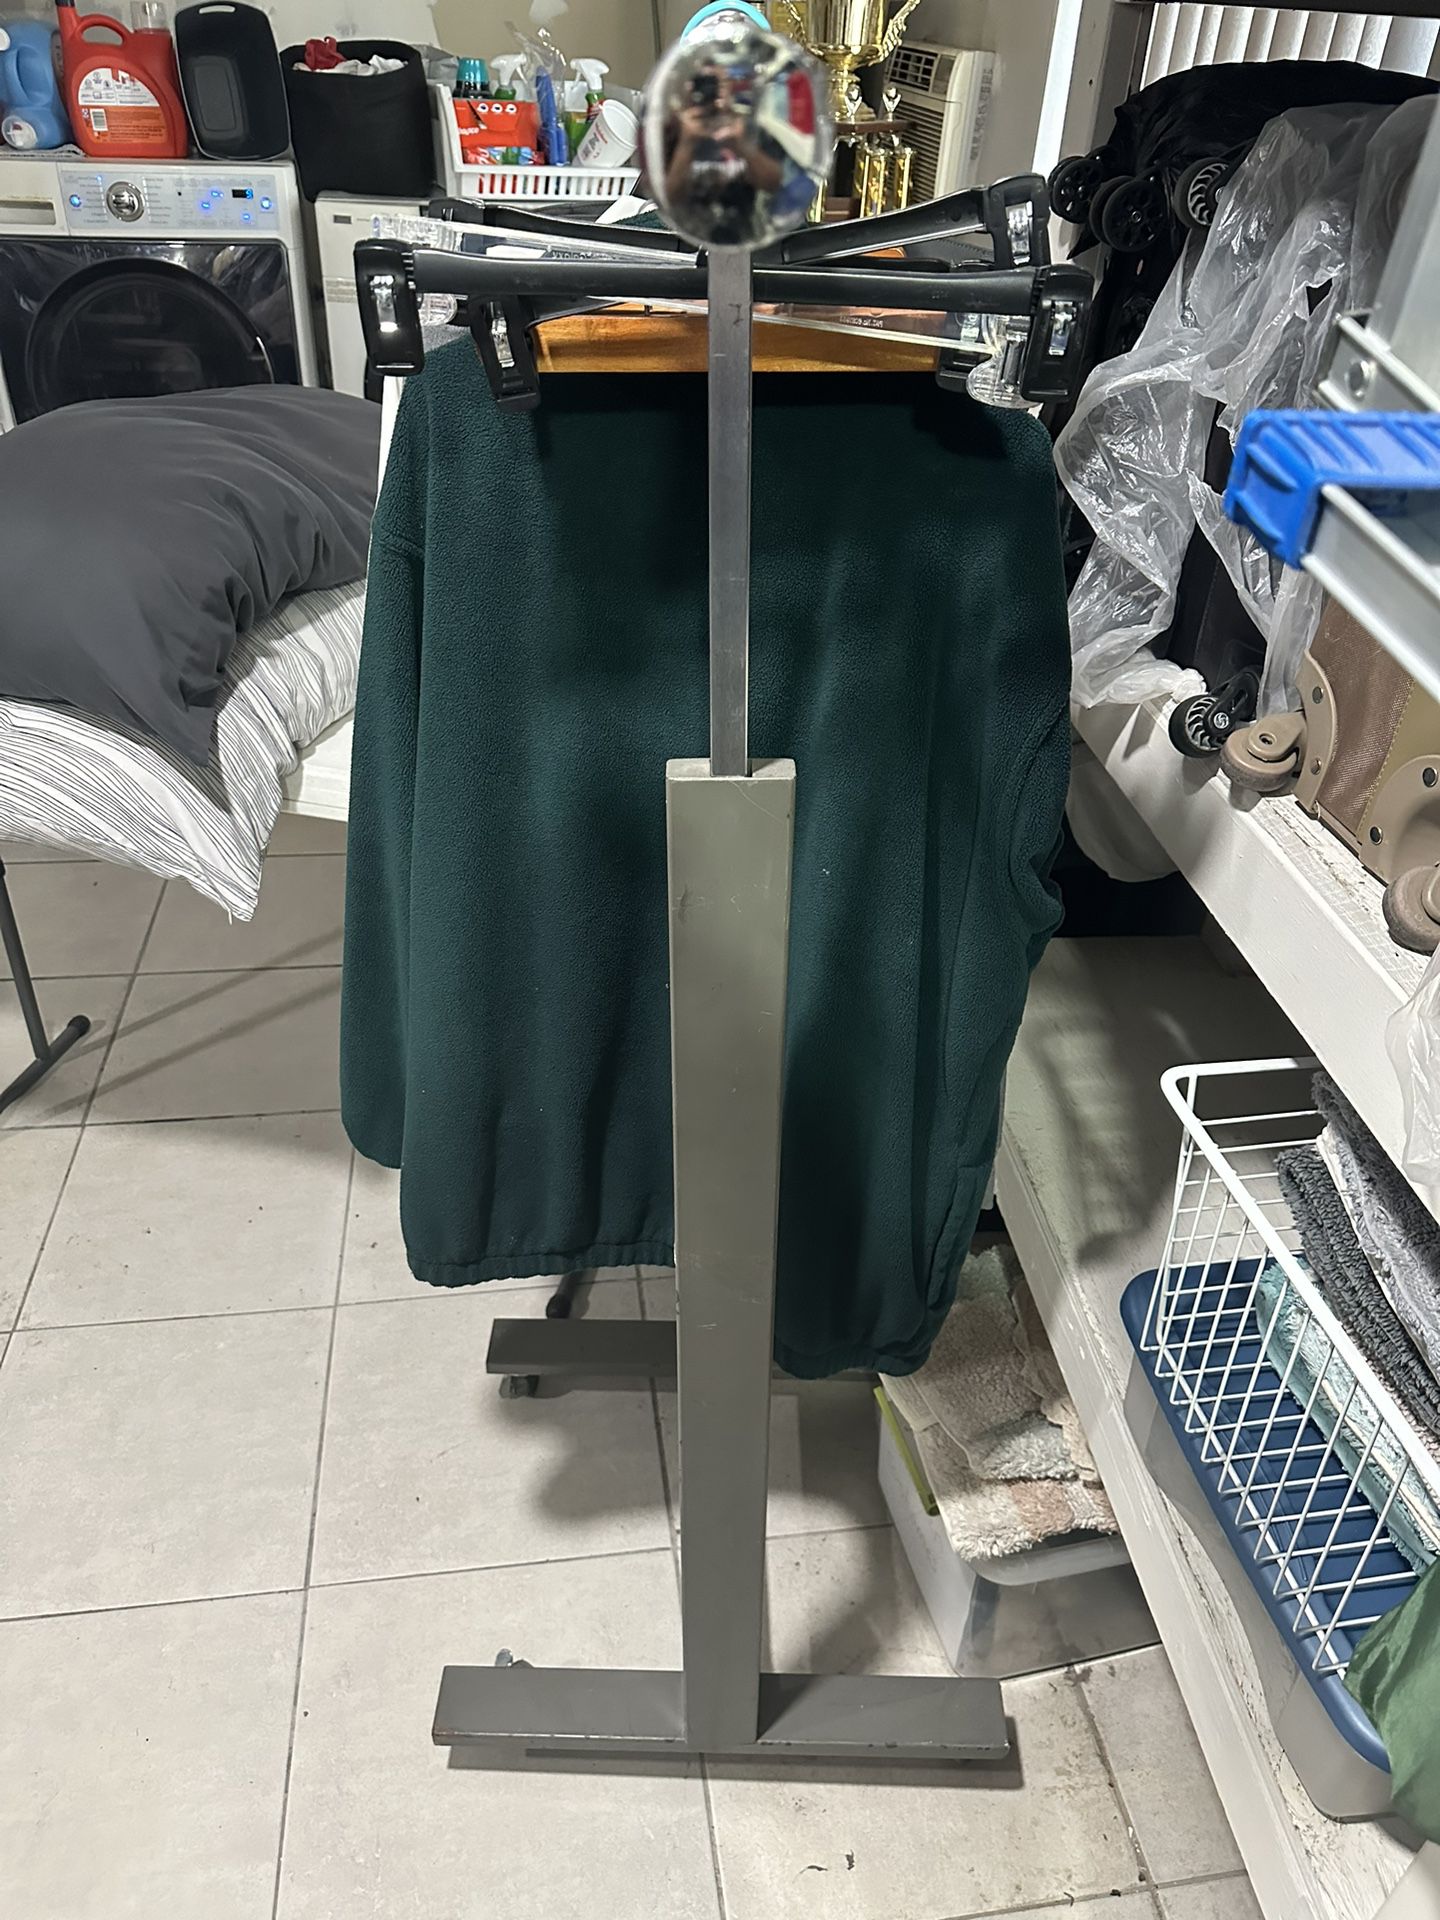 Metallic Clothing Rack for Sale in Fontana, CA - OfferUp